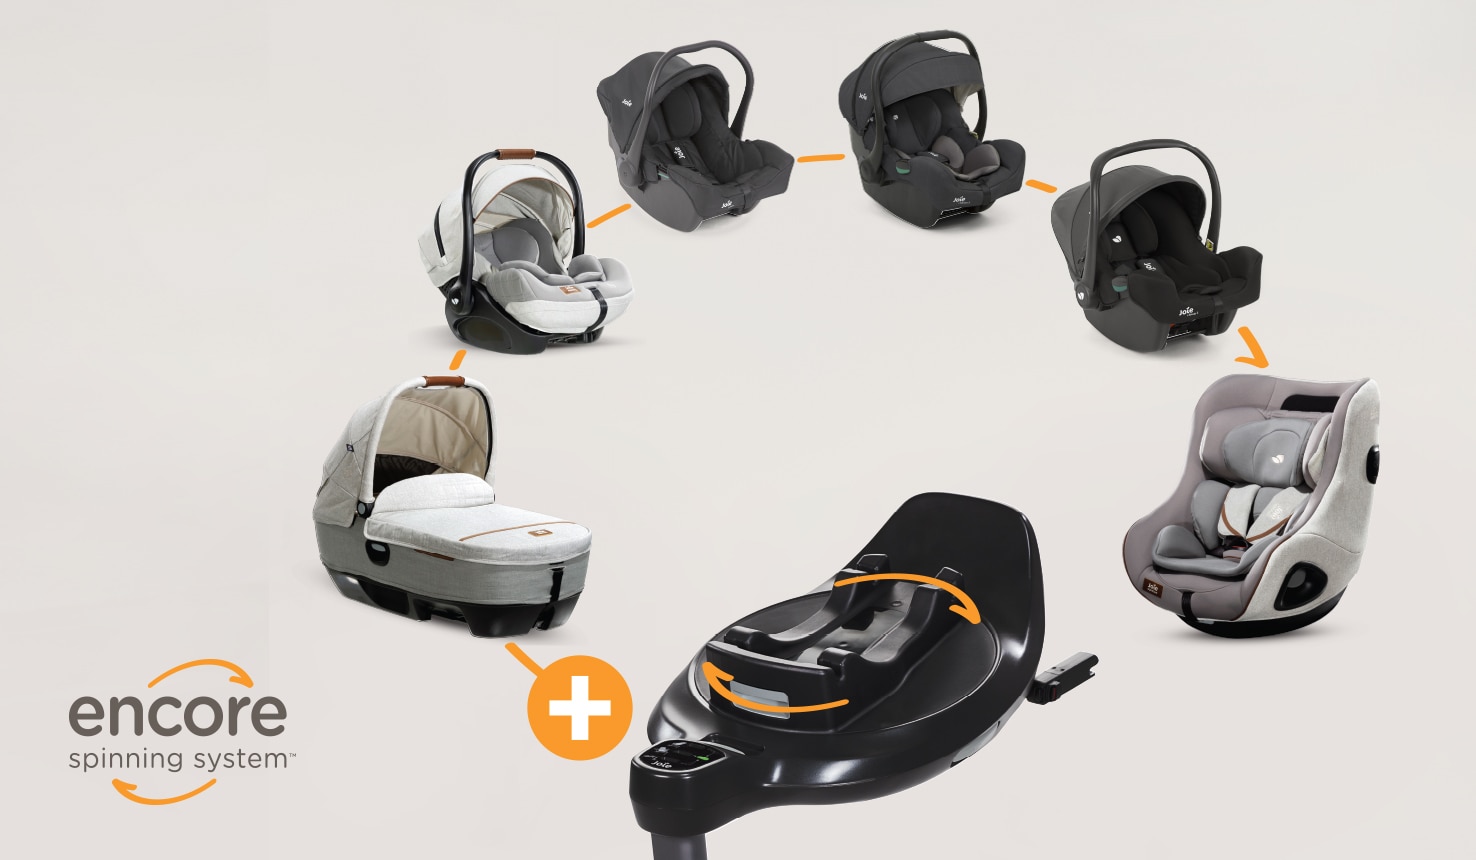  i base encore is compatible with a variety of Joie car seats as part of the encore spinning system to grow with your child from birth to four.